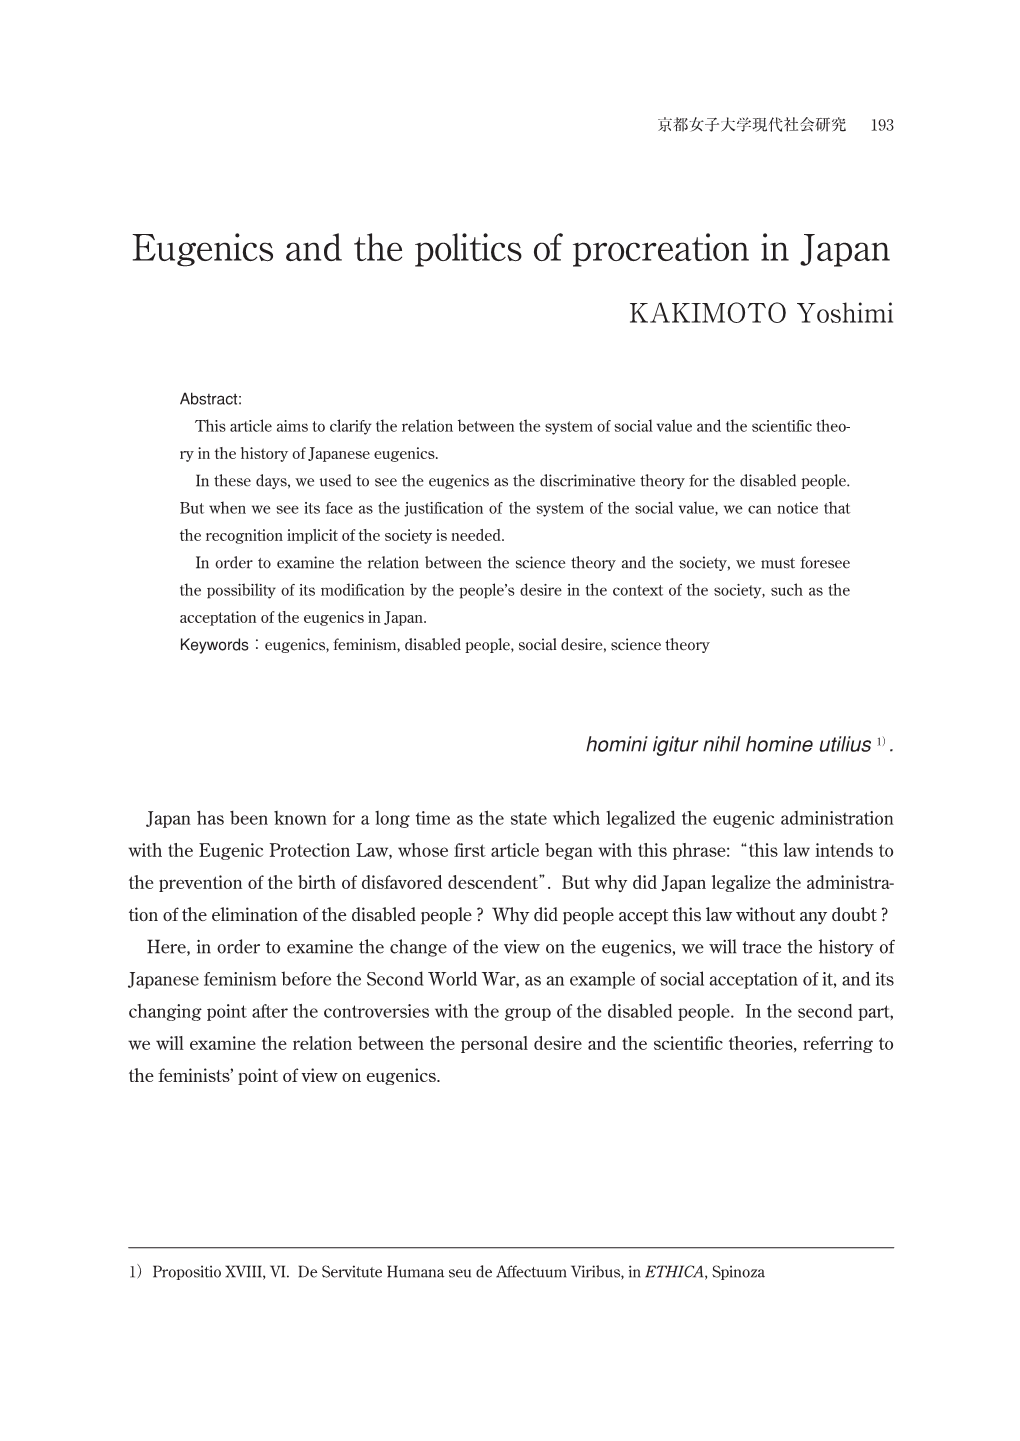 Eugenics and the Politics of Procreation in Japan